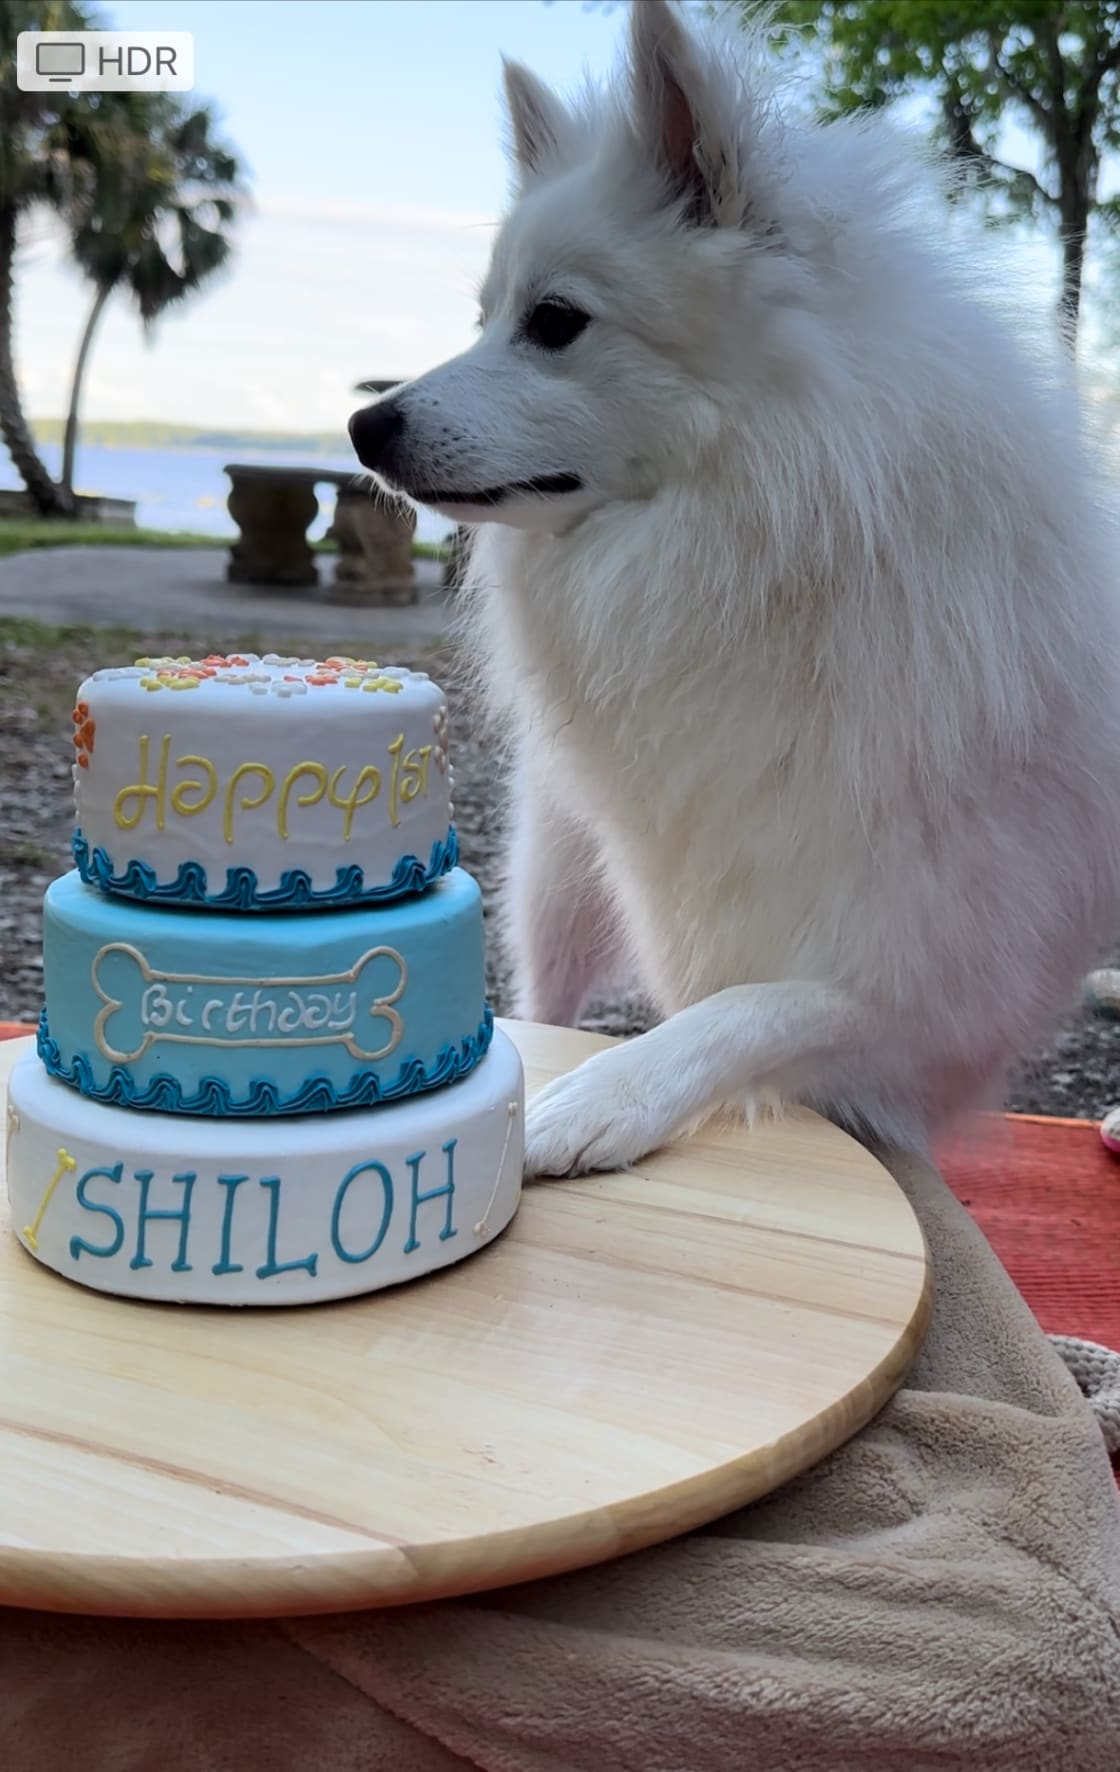 Birthday party for Shiloh @ the lake!